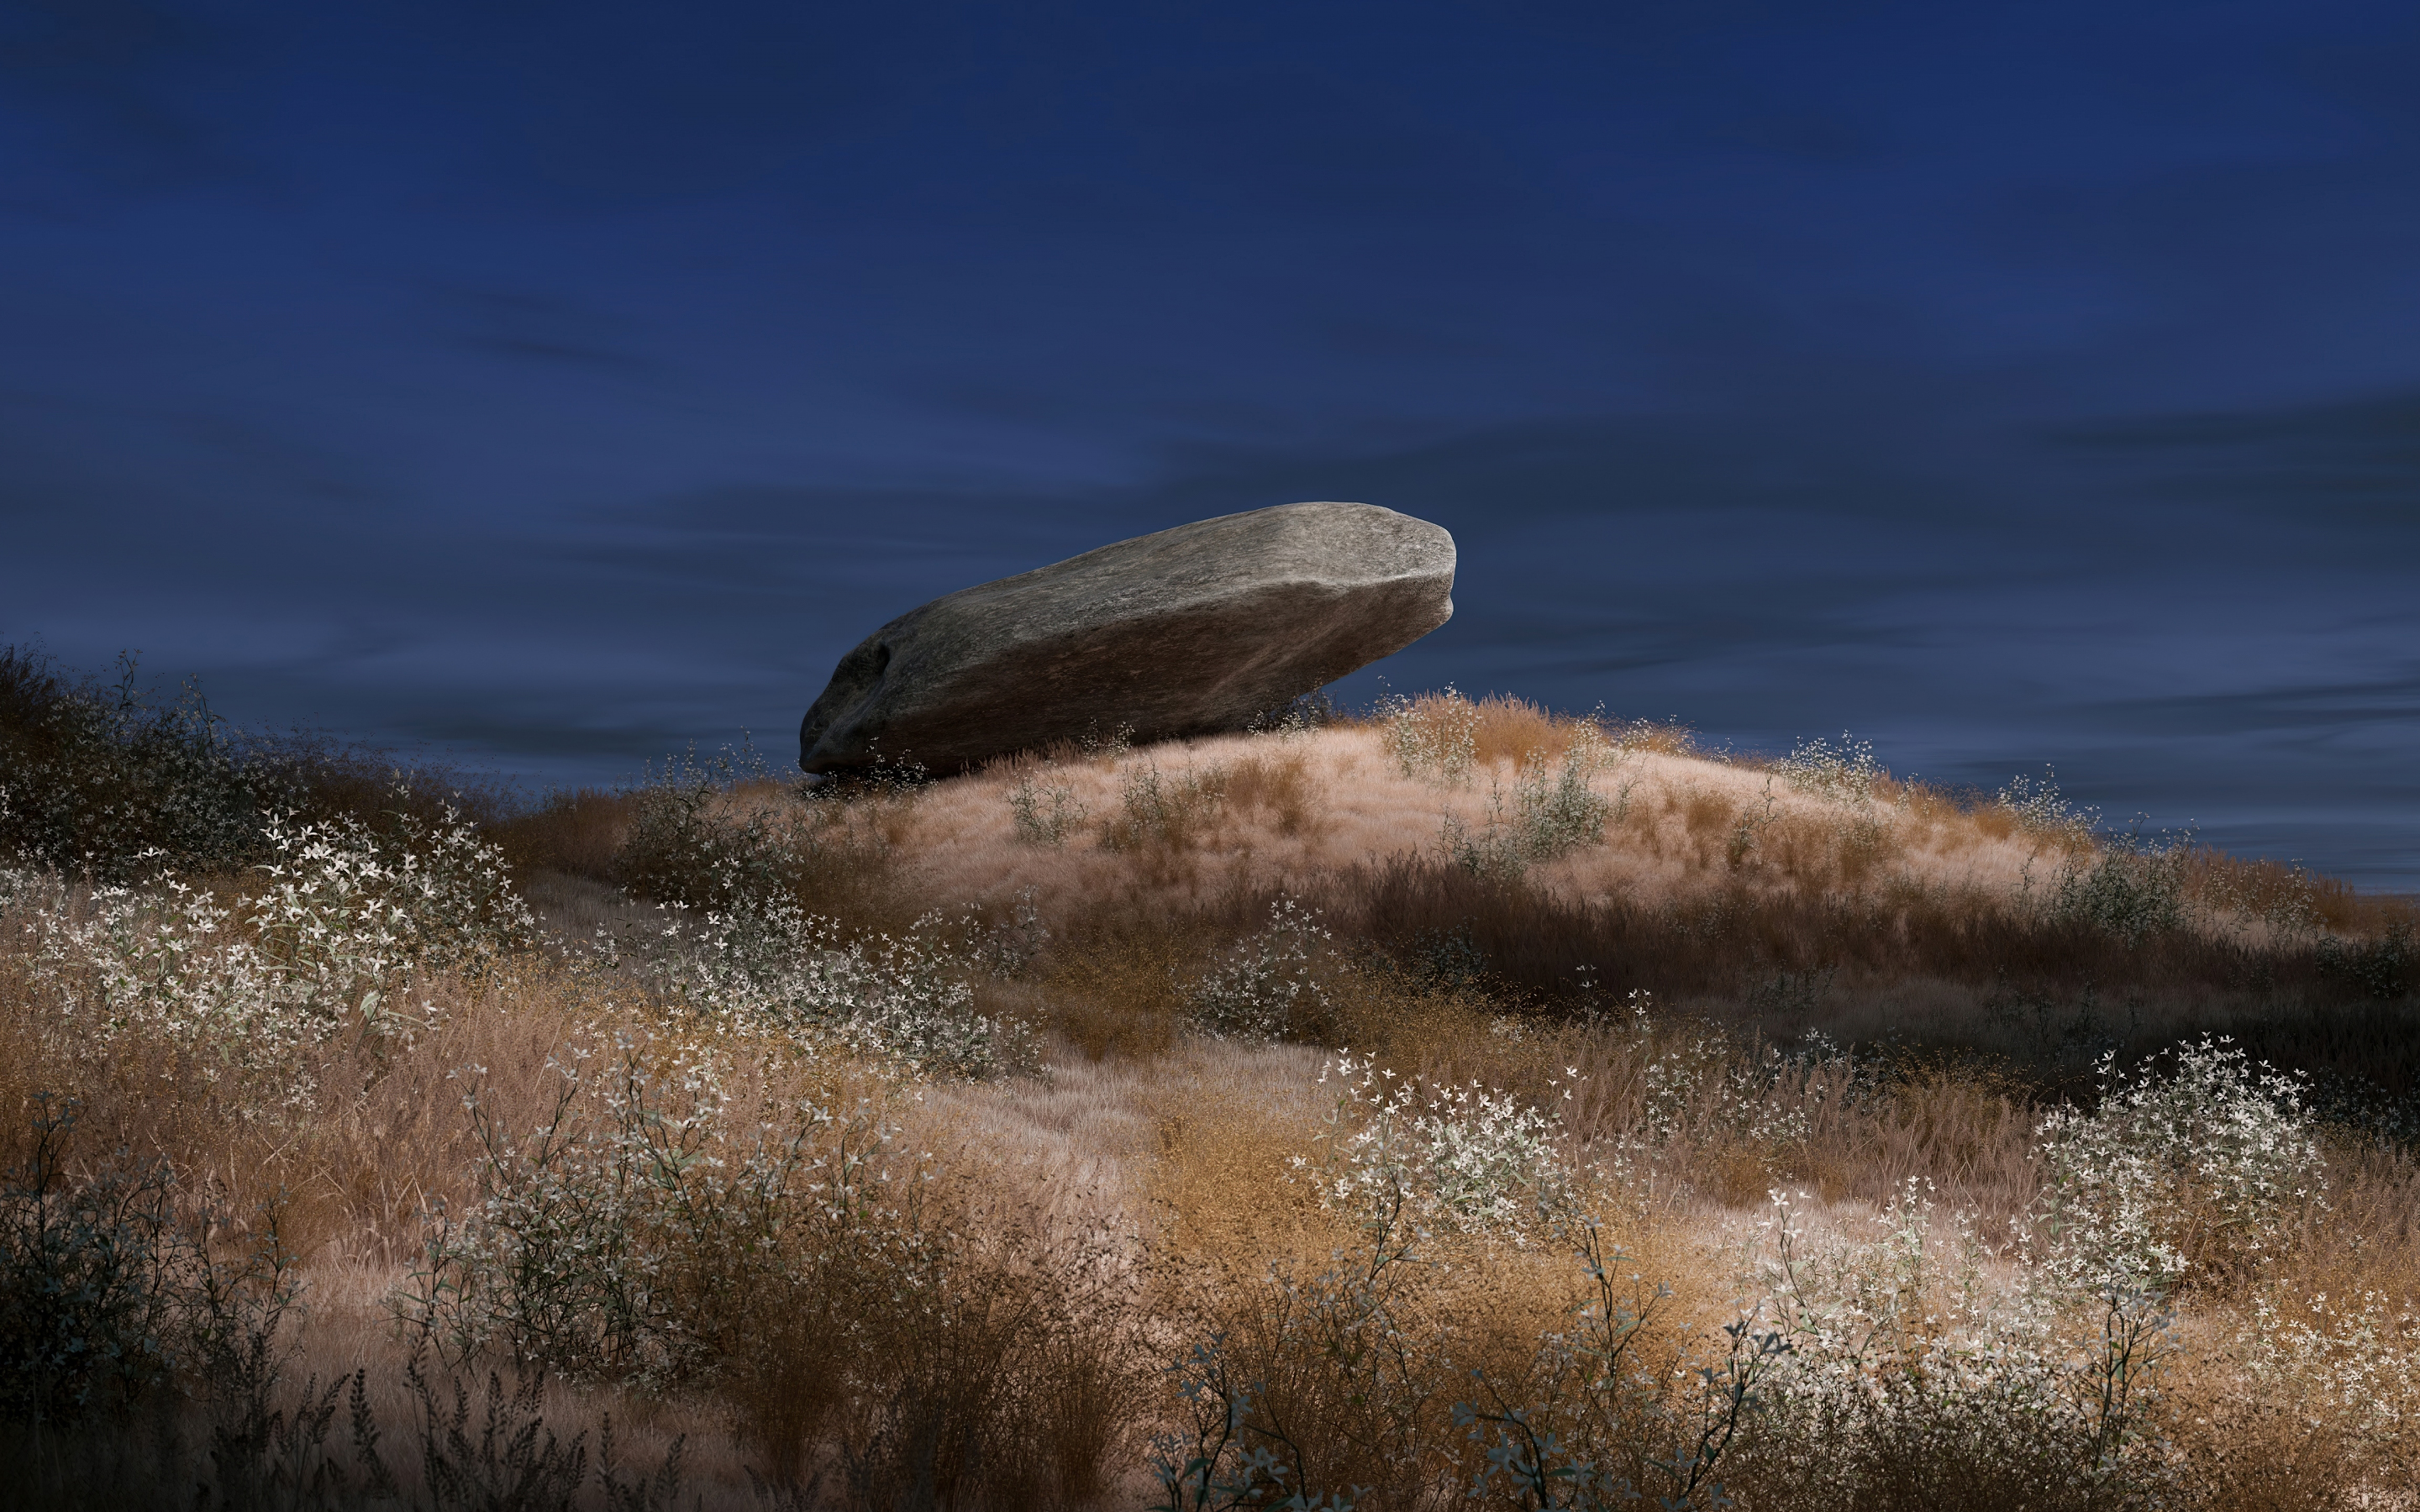 The lonely rock, Chrome OS, stock, dark night, landscape, 2880x1800 wallpaper